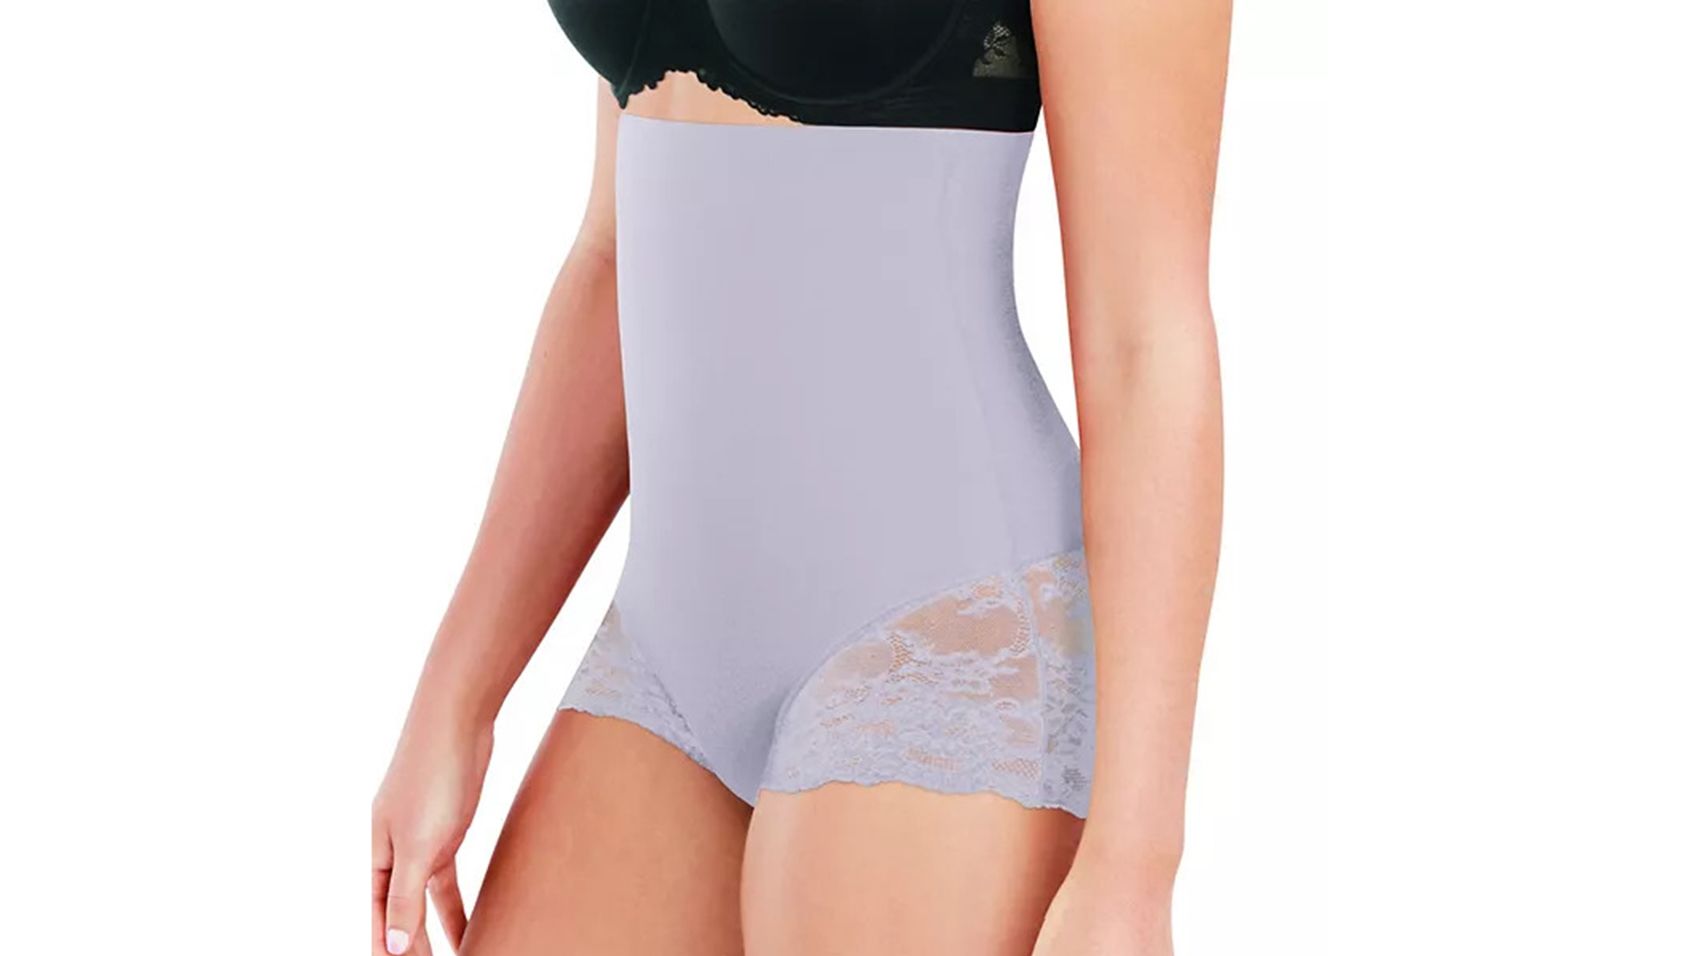 BALI BLACK LACE 'N Smooth Shaping Firm Control Body Briefer, US